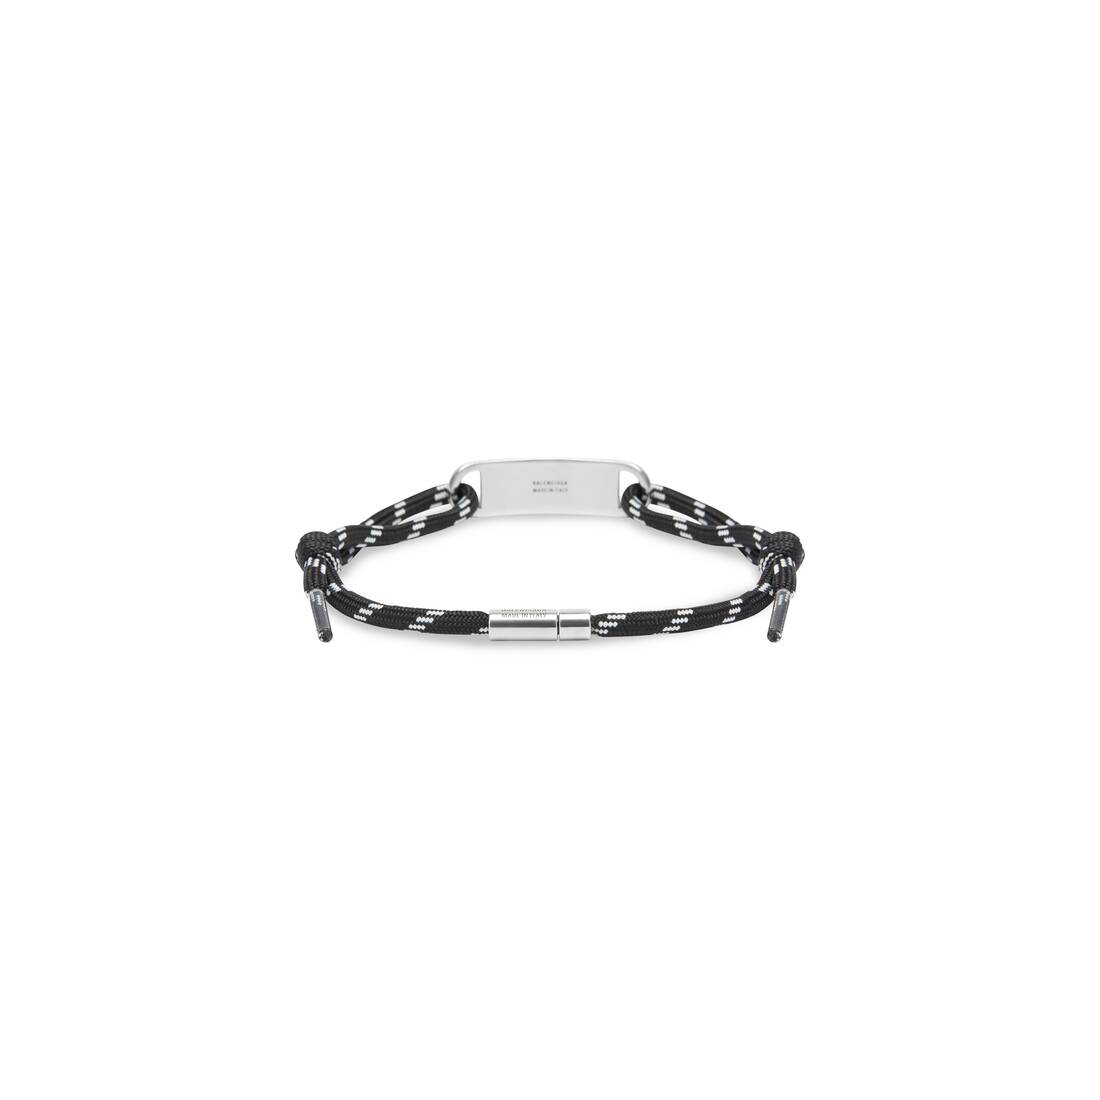 Stylish Leather Choker With Unique Silver Plated Touch for Women 